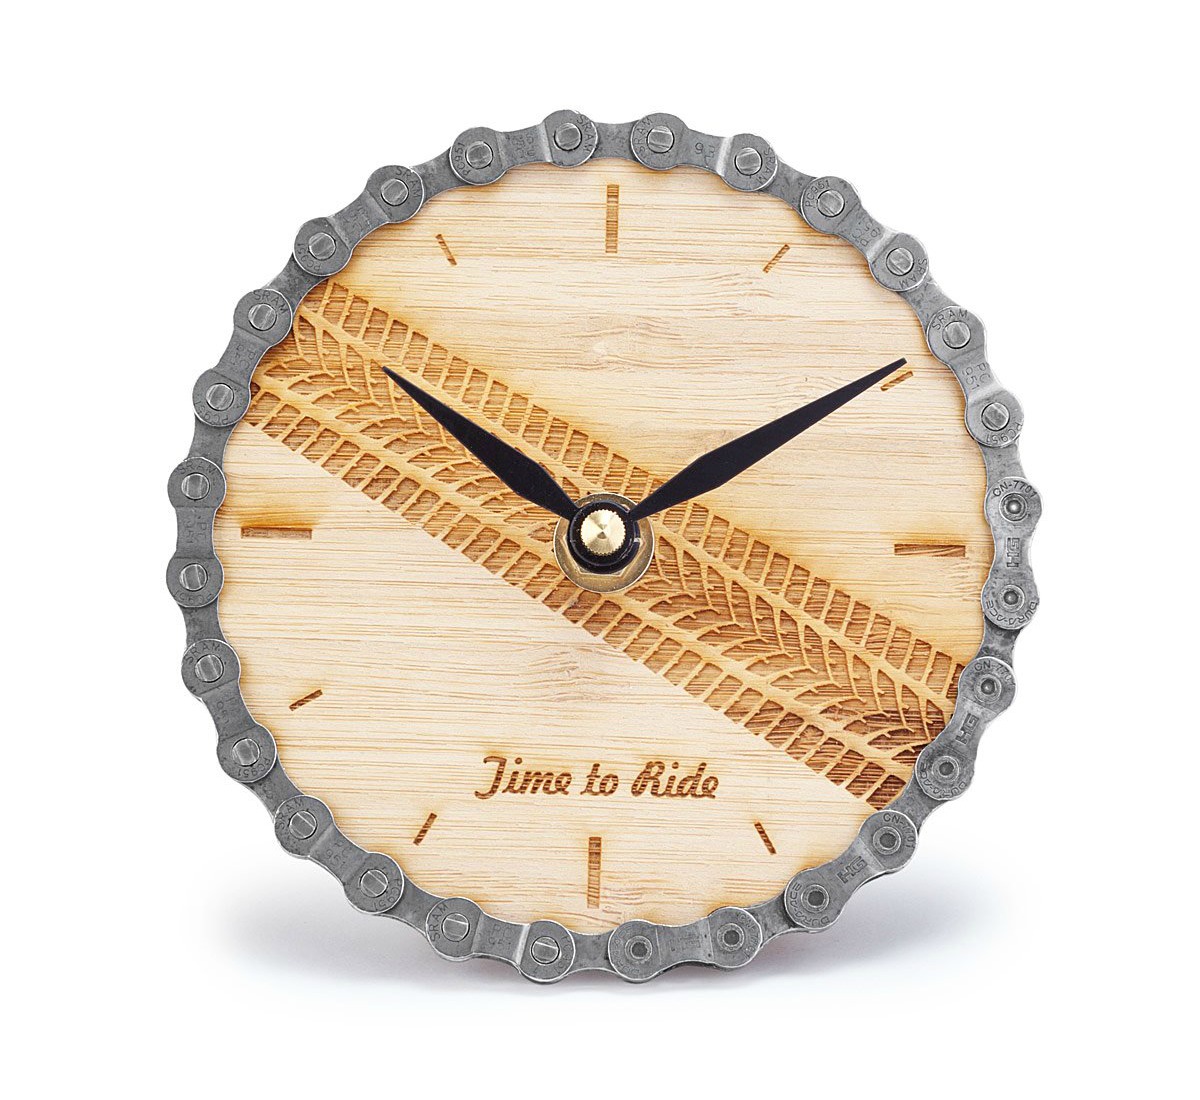 Time to Ride Desk Clock | UncommonGoods